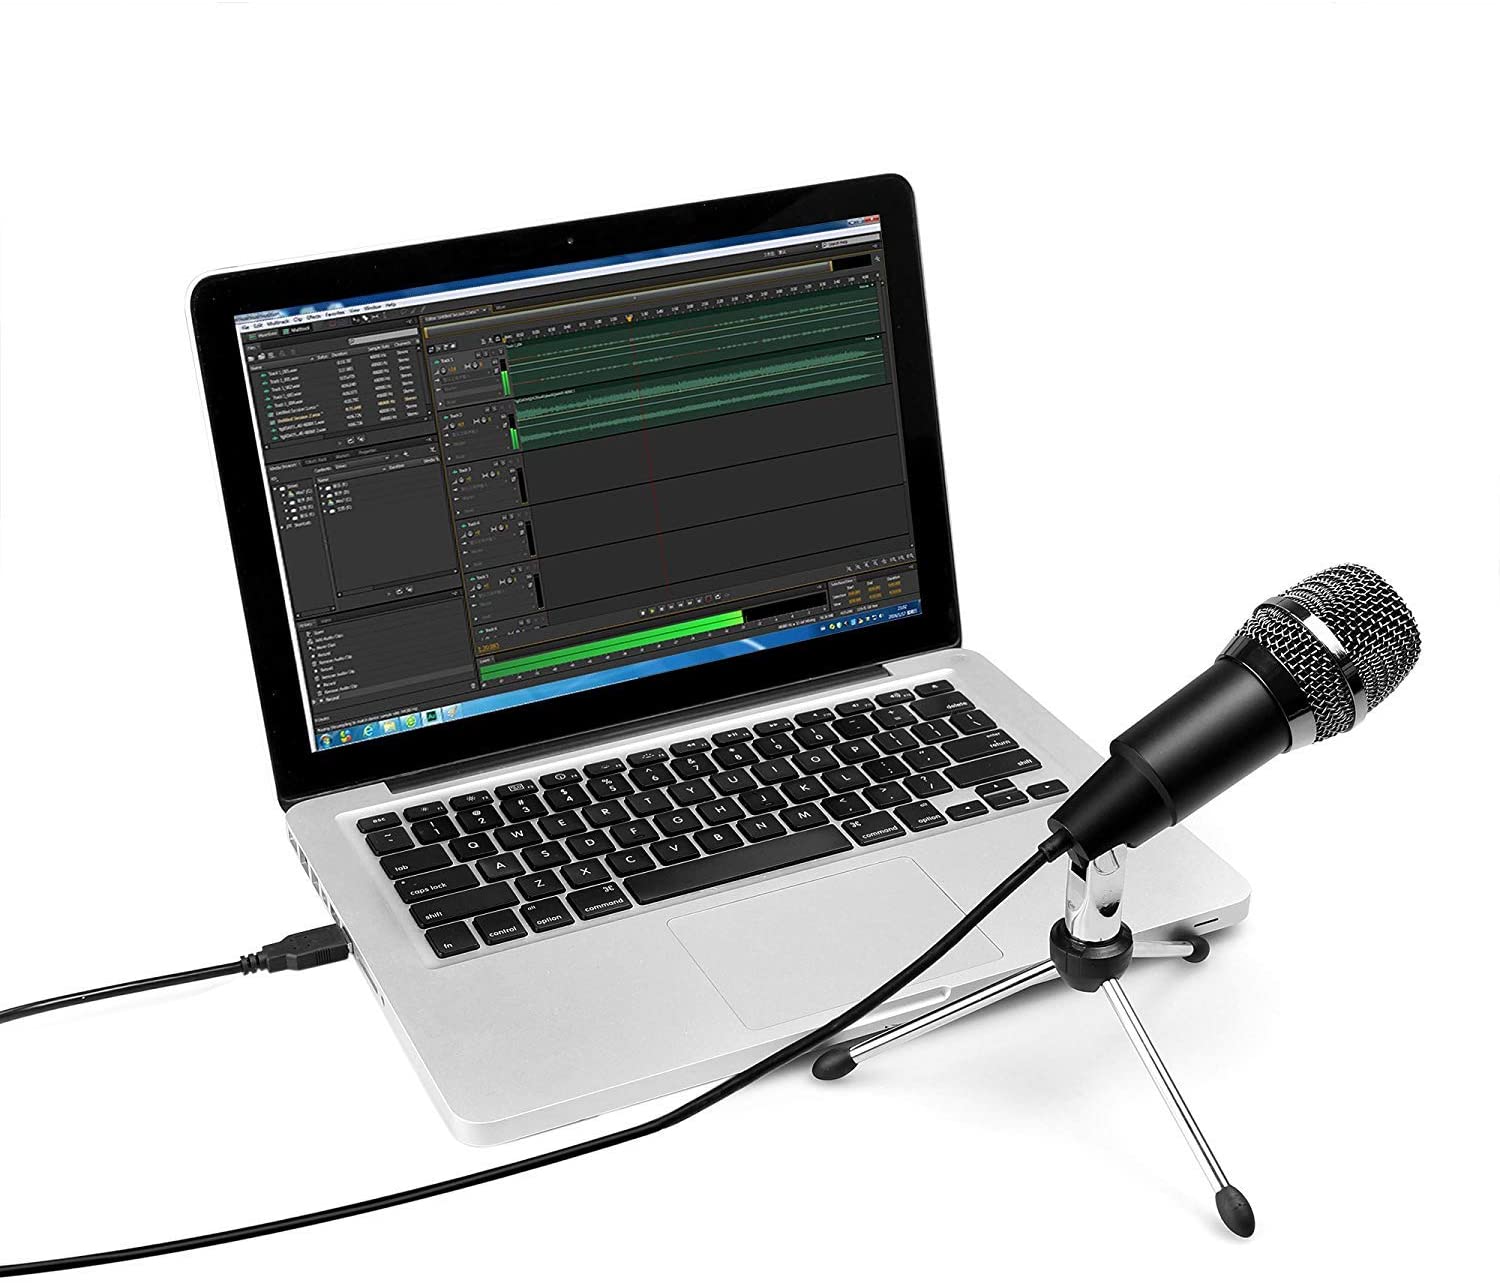 FIFINE USB Microphone, Plug and Play Home Studio USB Condenser Microphone  for Skype, Recordings for , Google Voice Search, Games, for Windows